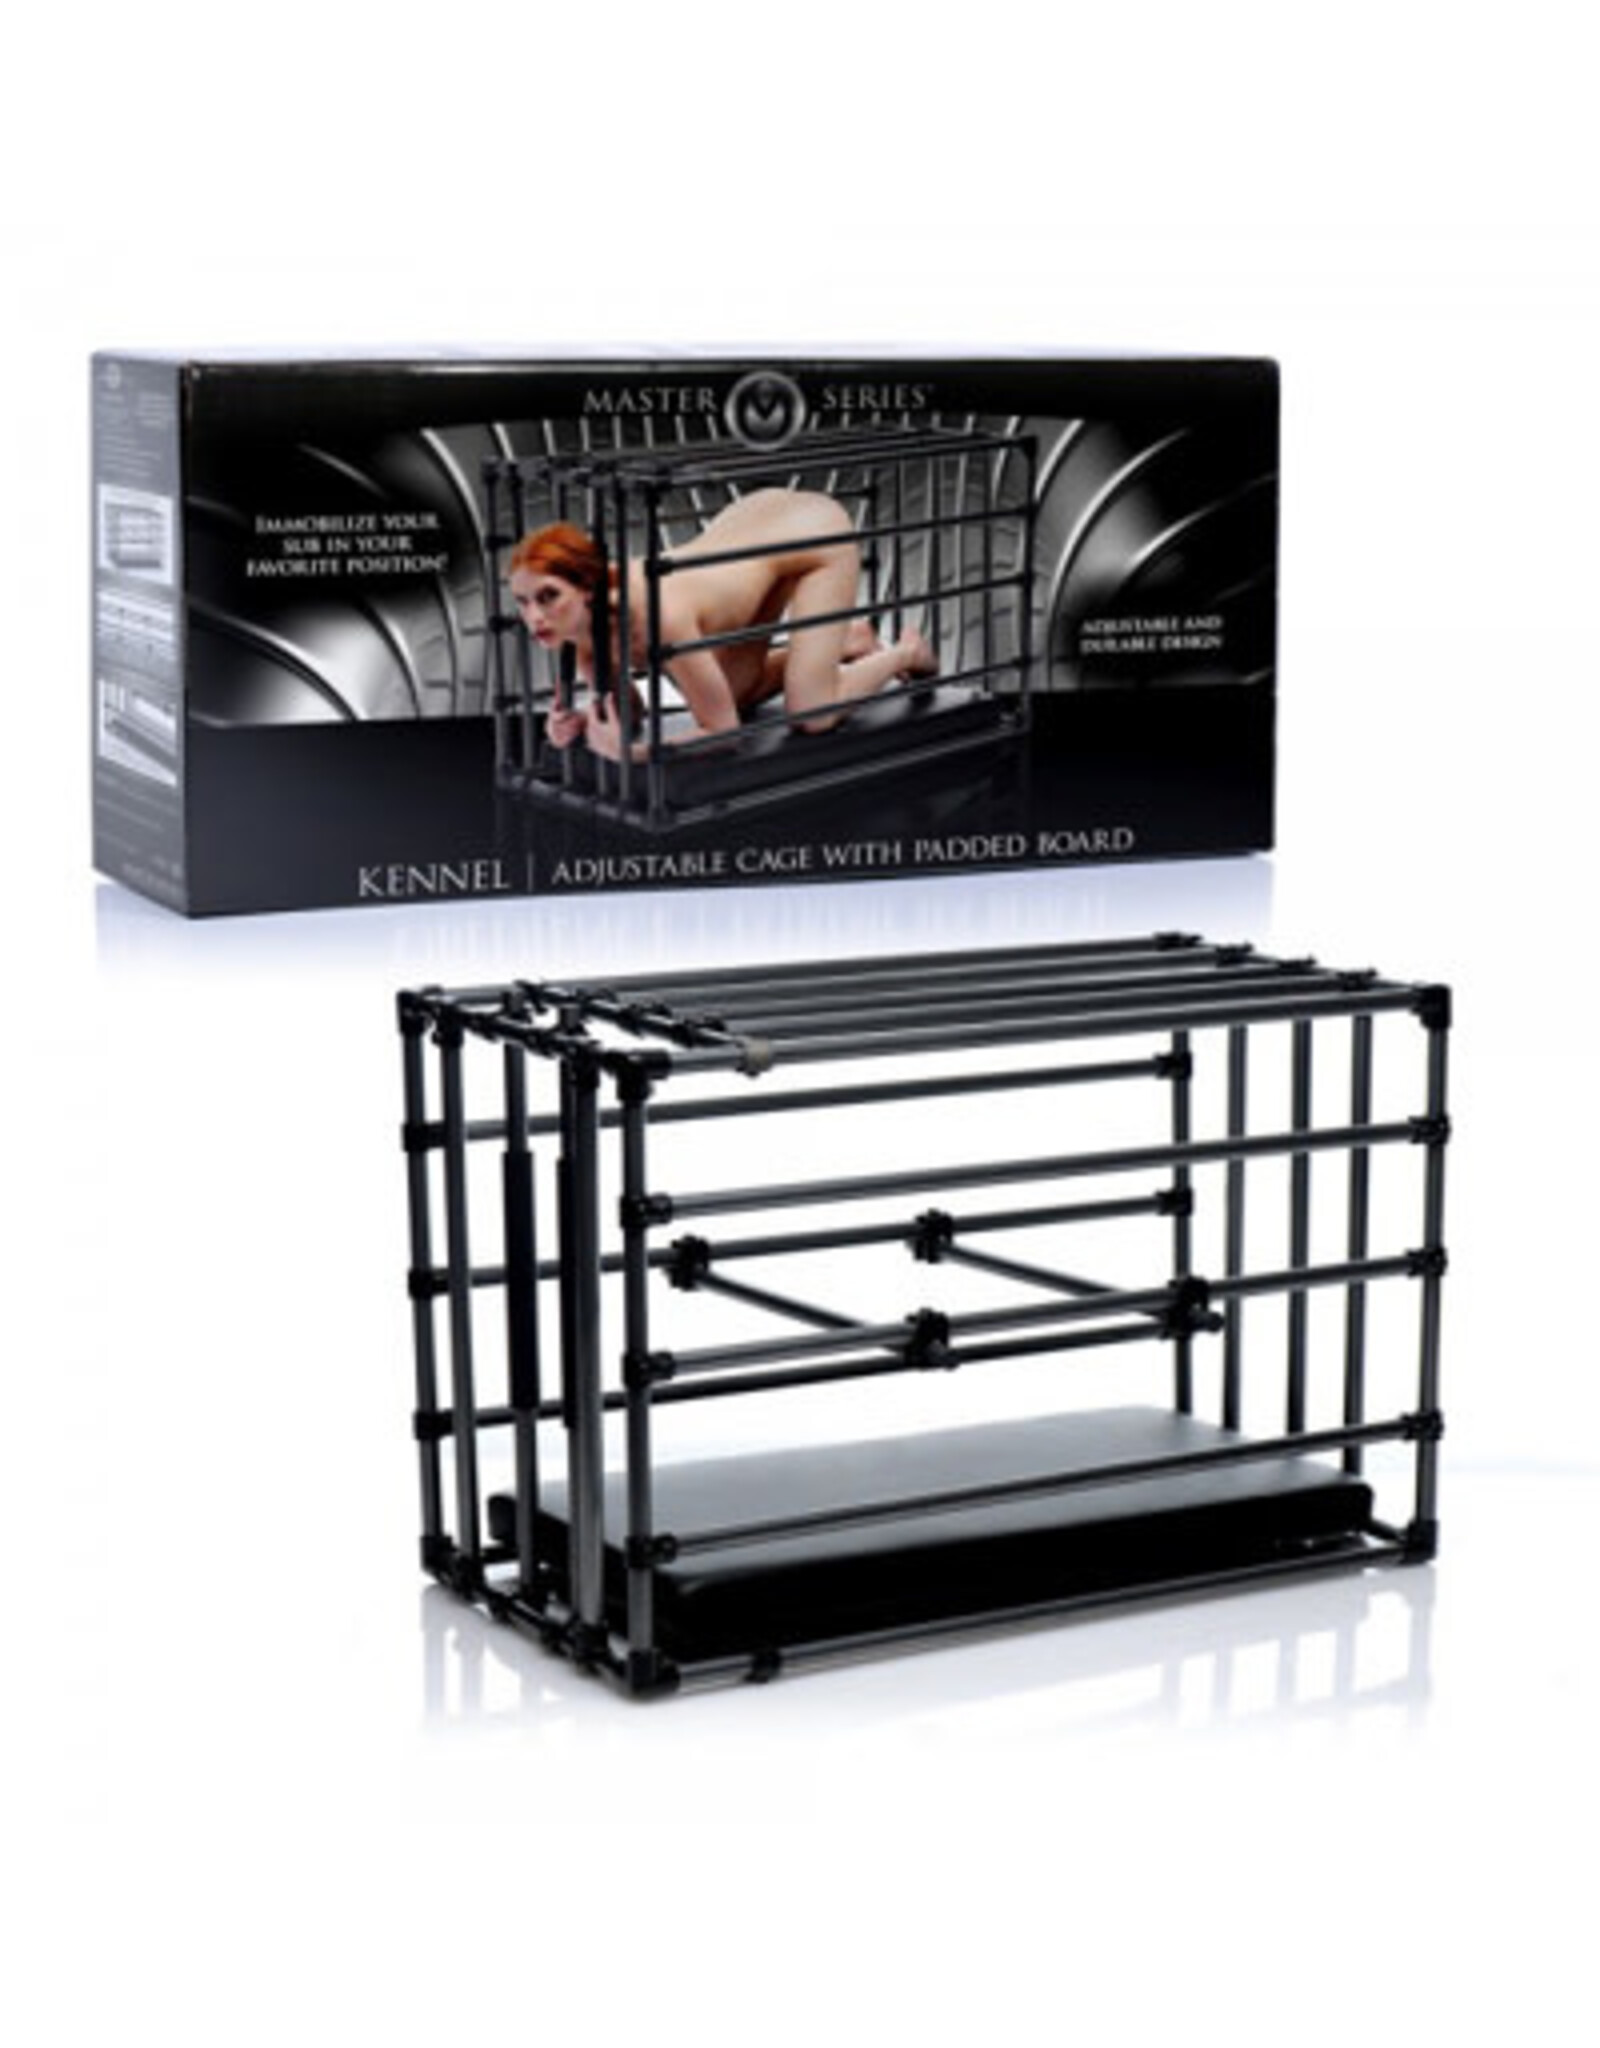 Master Series - Kennel Adjustable Cage with Padded Board